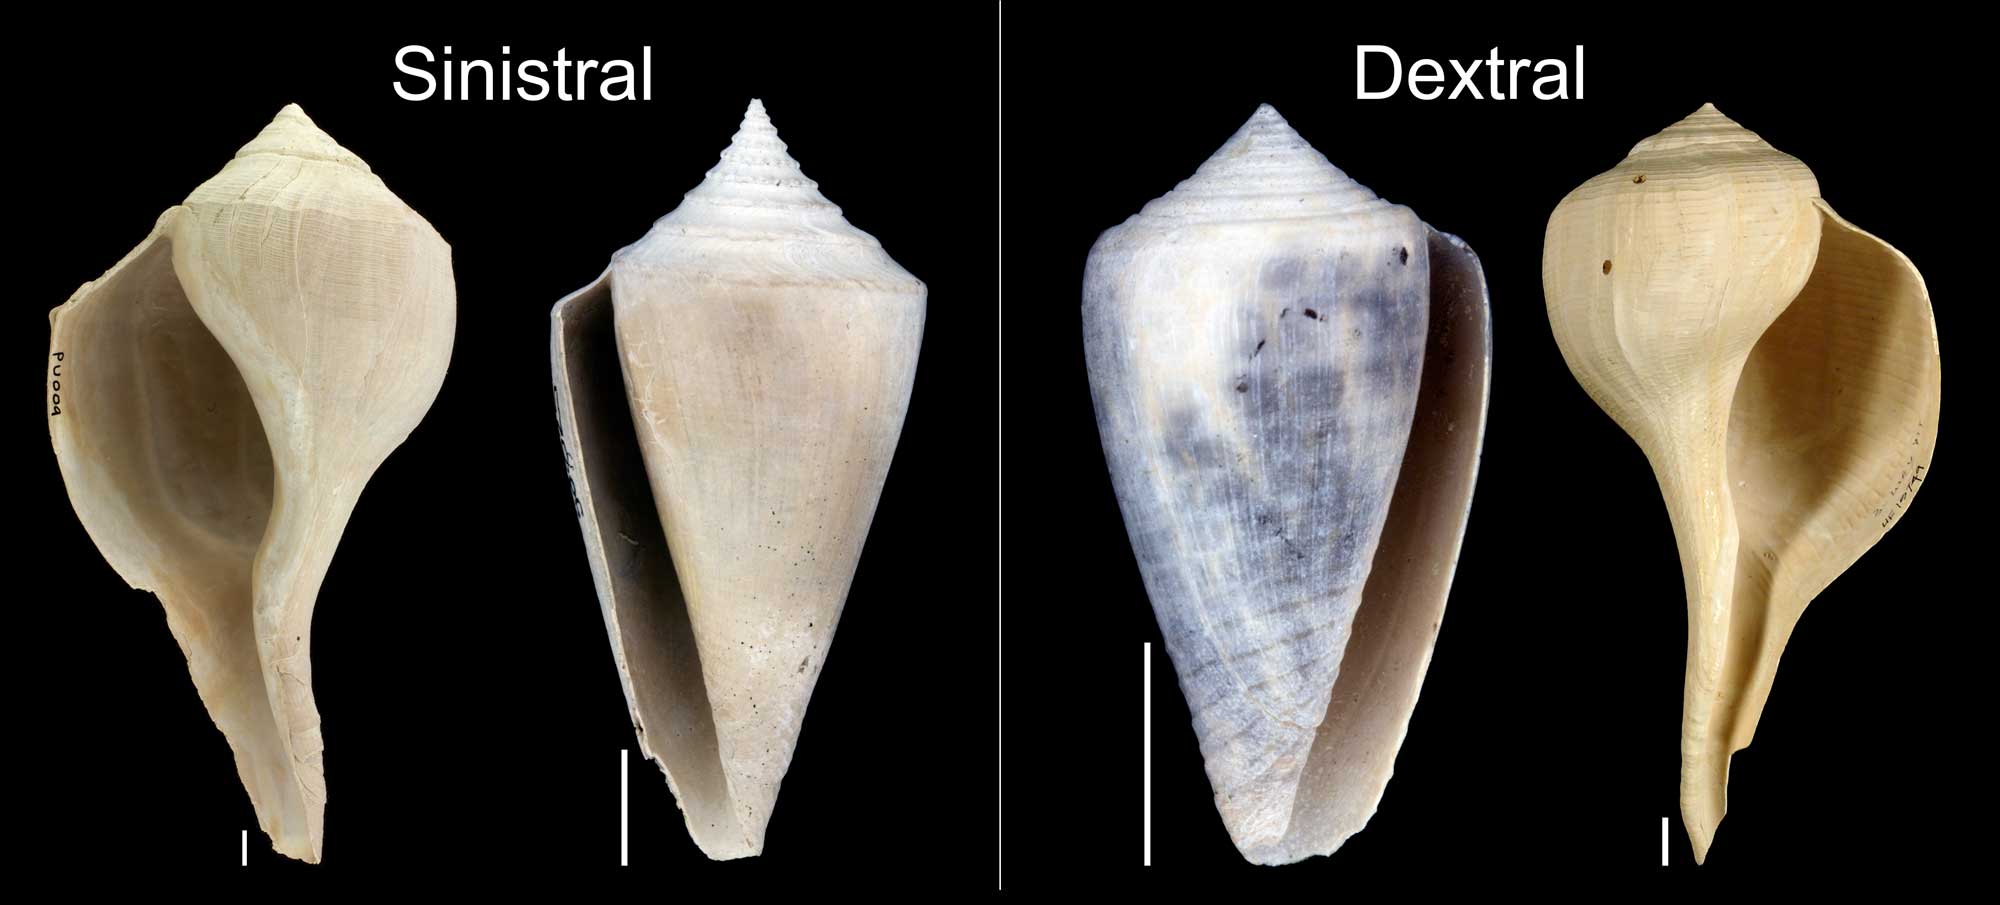 Image showing two examples of sinistral shells and two examples of dextral shells.